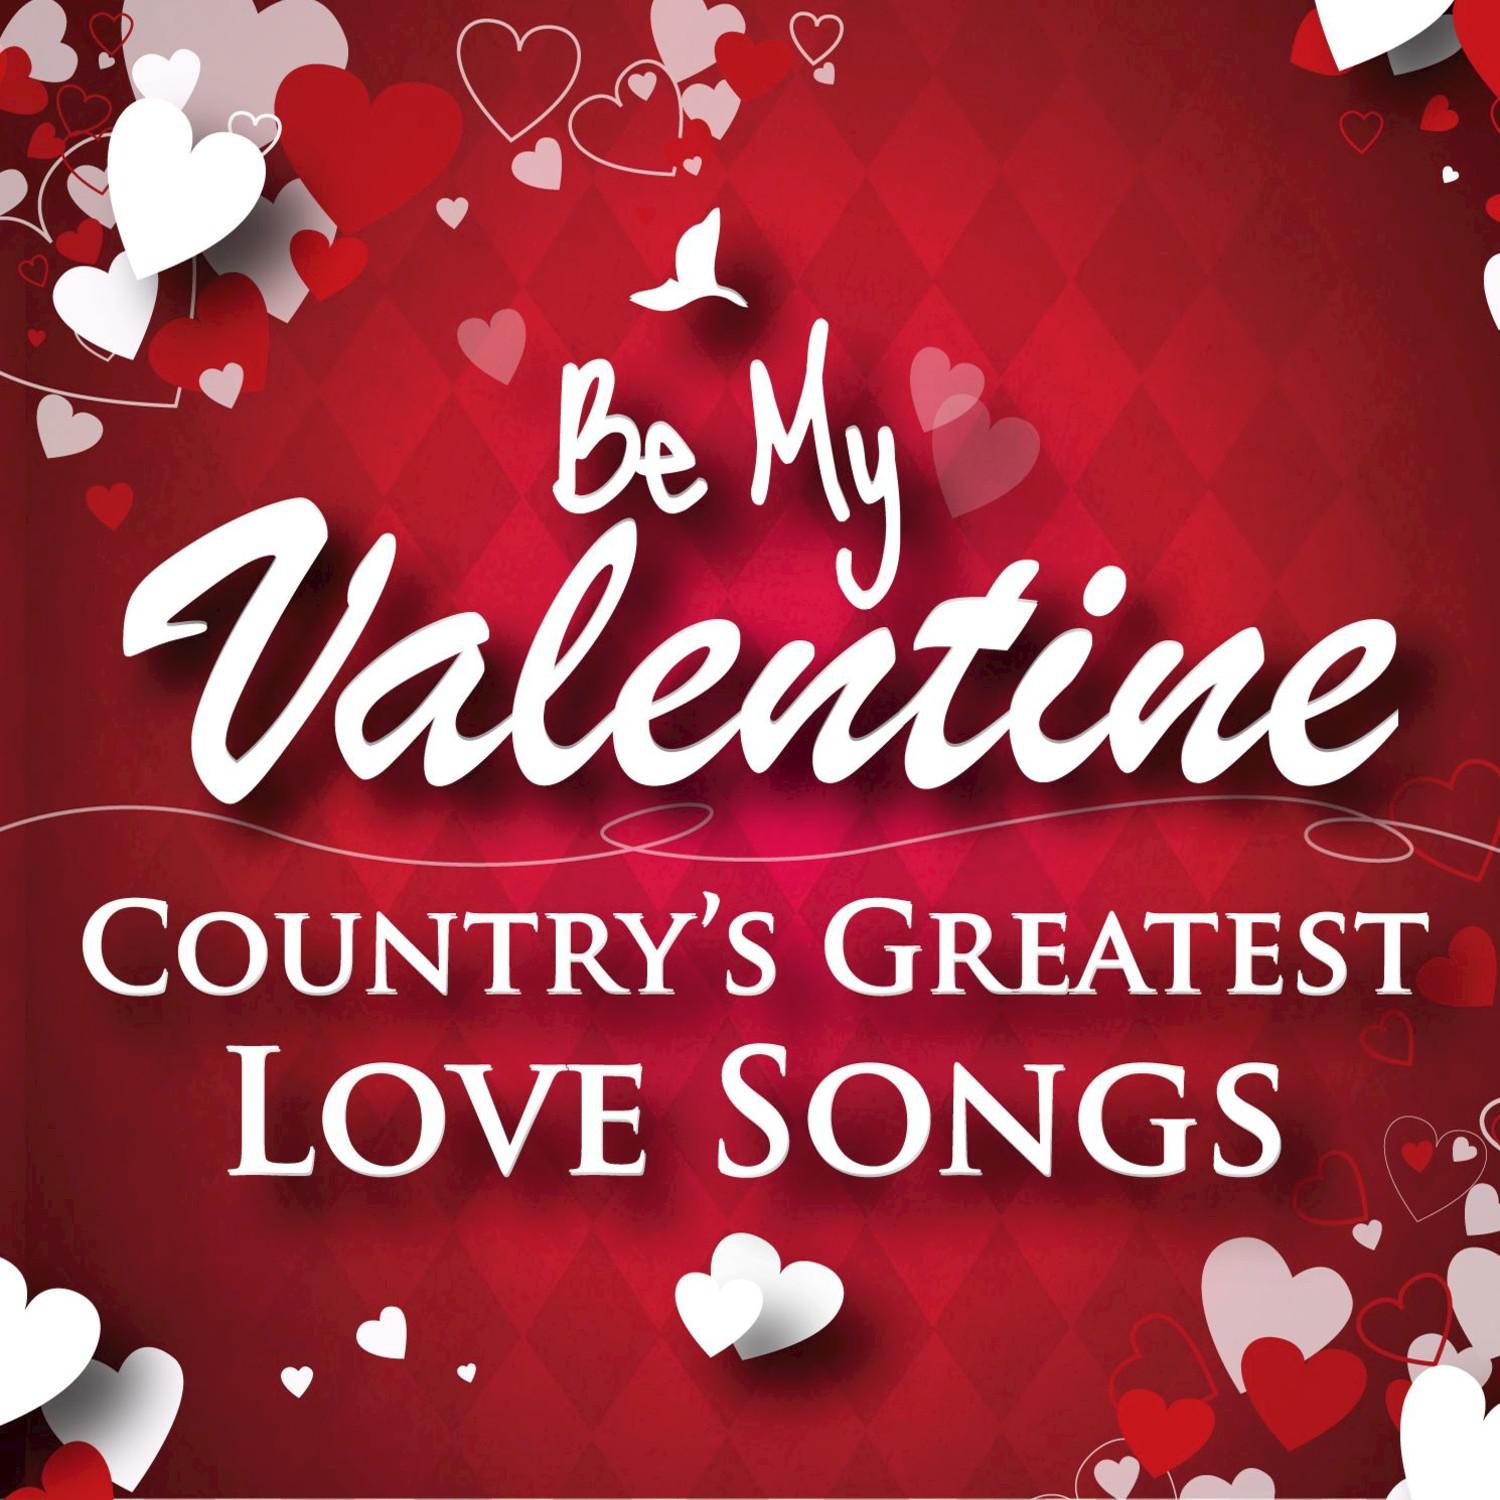 Be My Valentine - Country's Greatest Love Songs